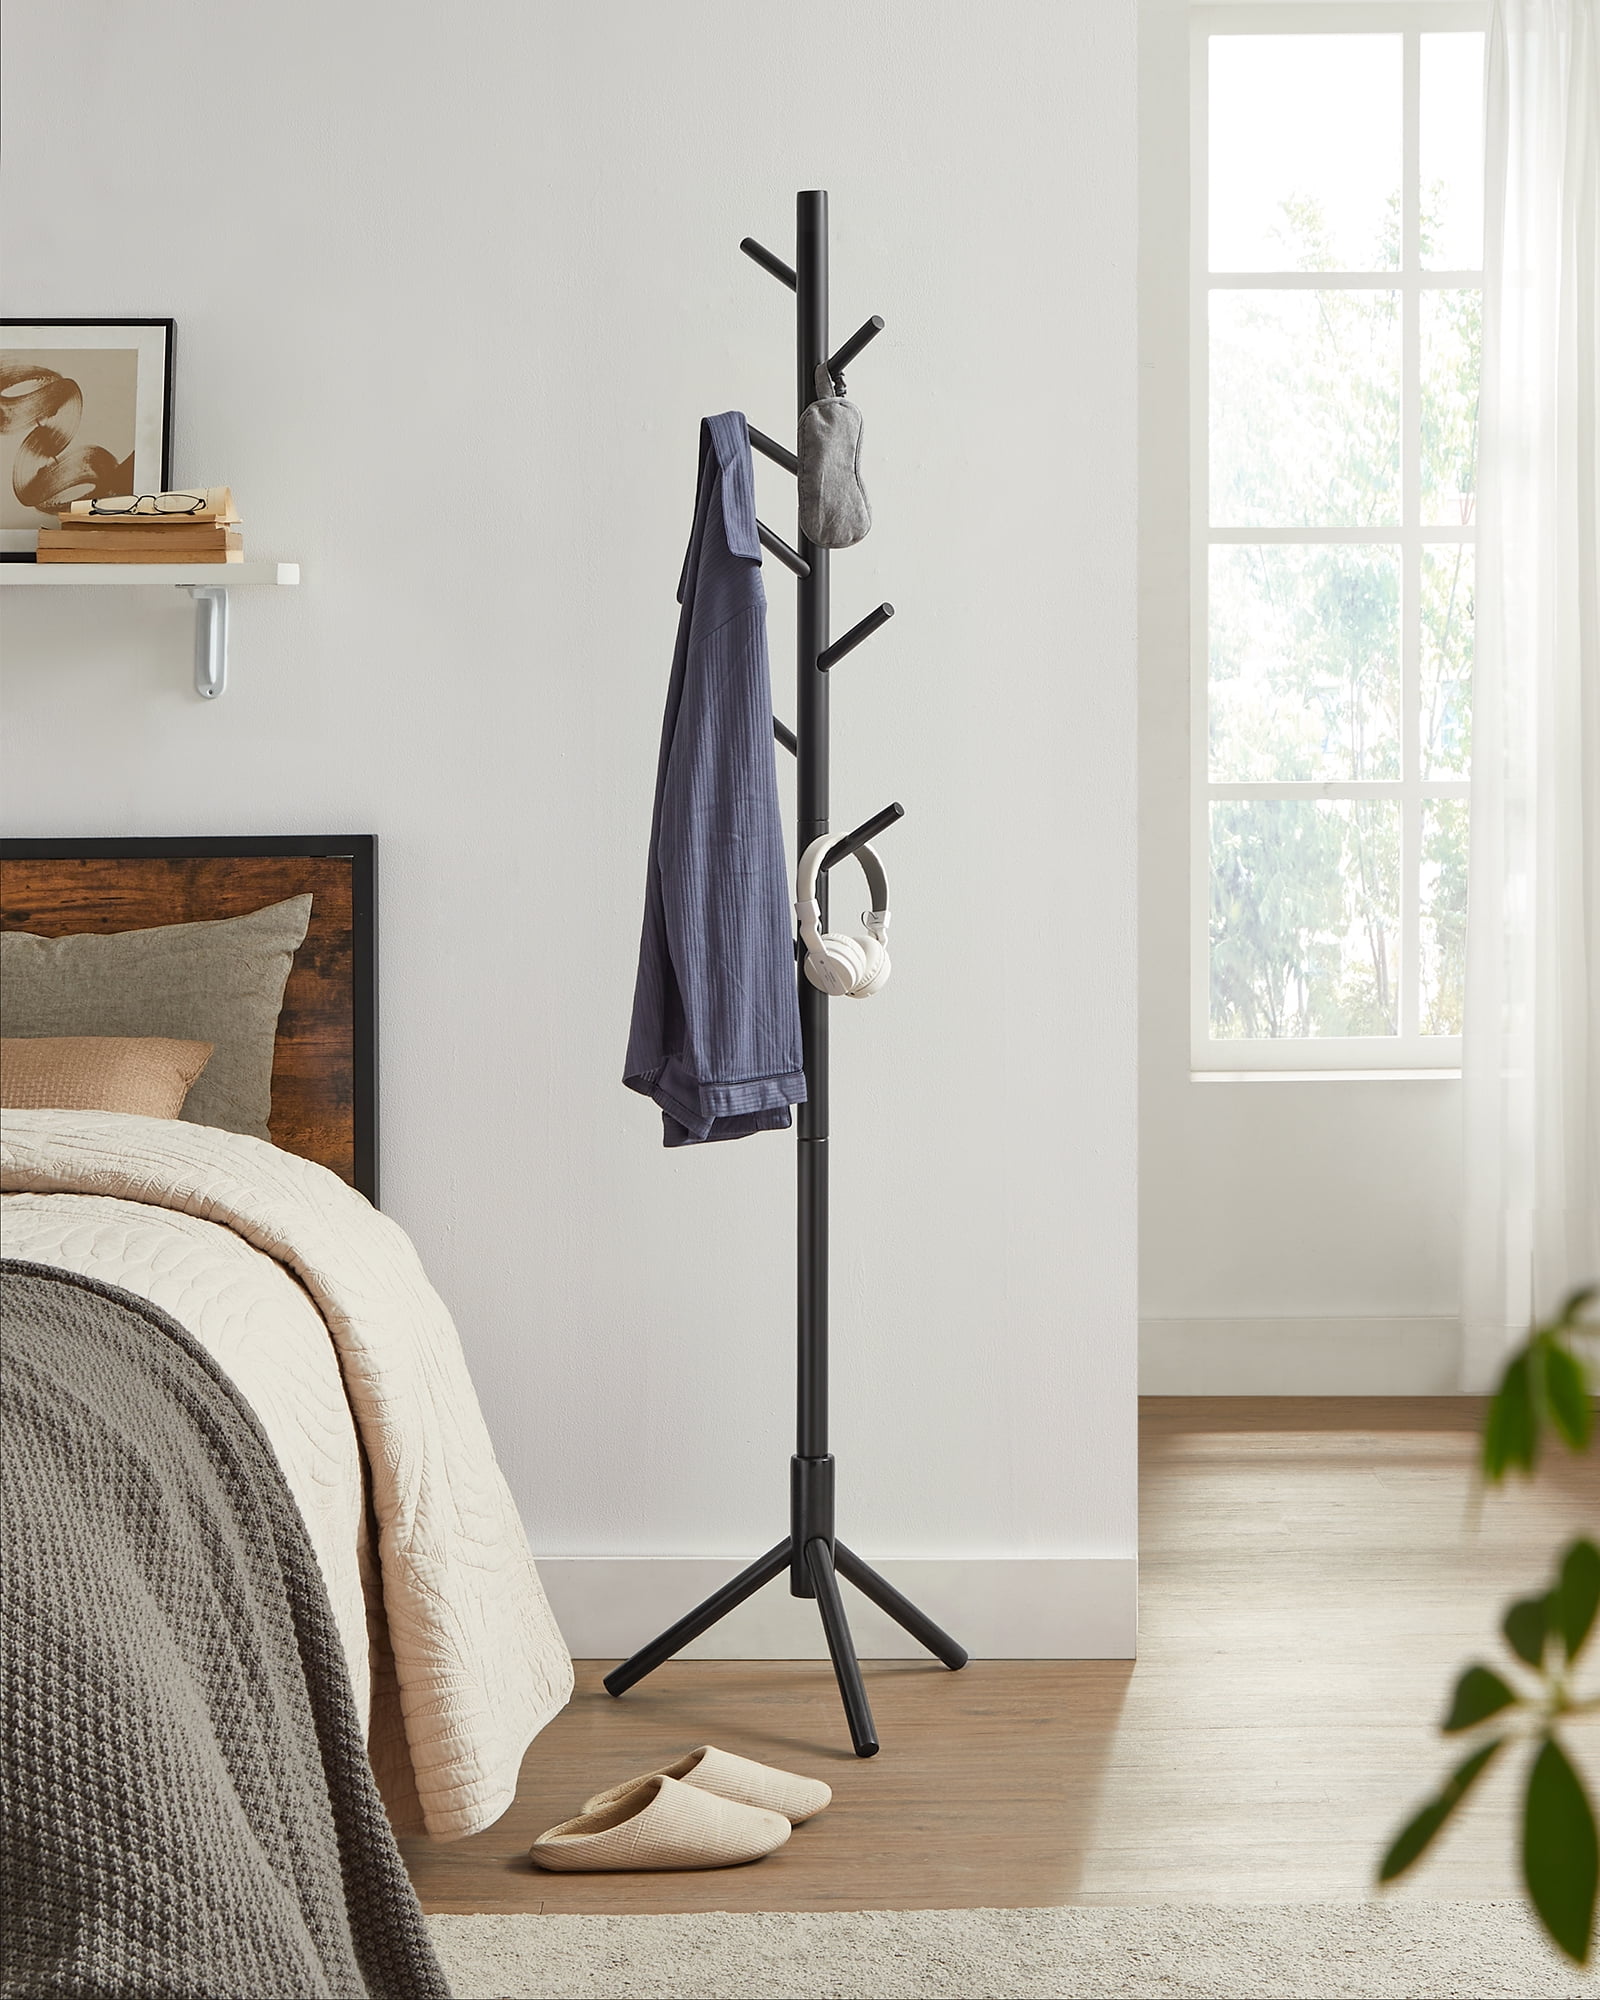 Wooden Coat Rack Freestanding Coat Tree with 4 Height Options and 9 Hooks,  Sturdy Coat Rack Stand fo…See more Wooden Coat Rack Freestanding Coat Tree